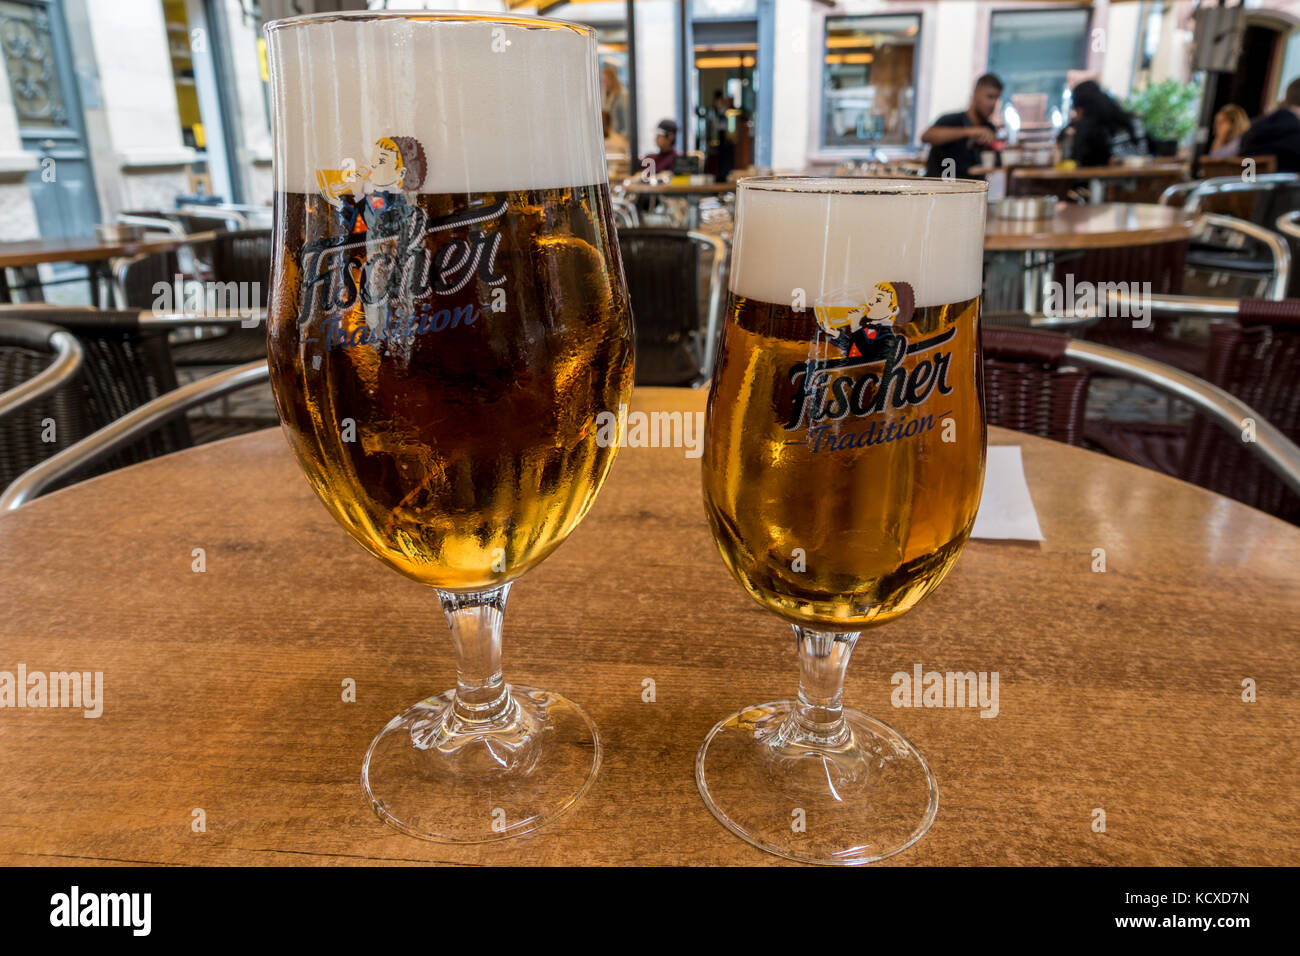 https://c8.alamy.com/comp/KCXD7N/two-glasses-of-traditional-lager-beer-in-a-small-strasbourg-cafe-KCXD7N.jpg